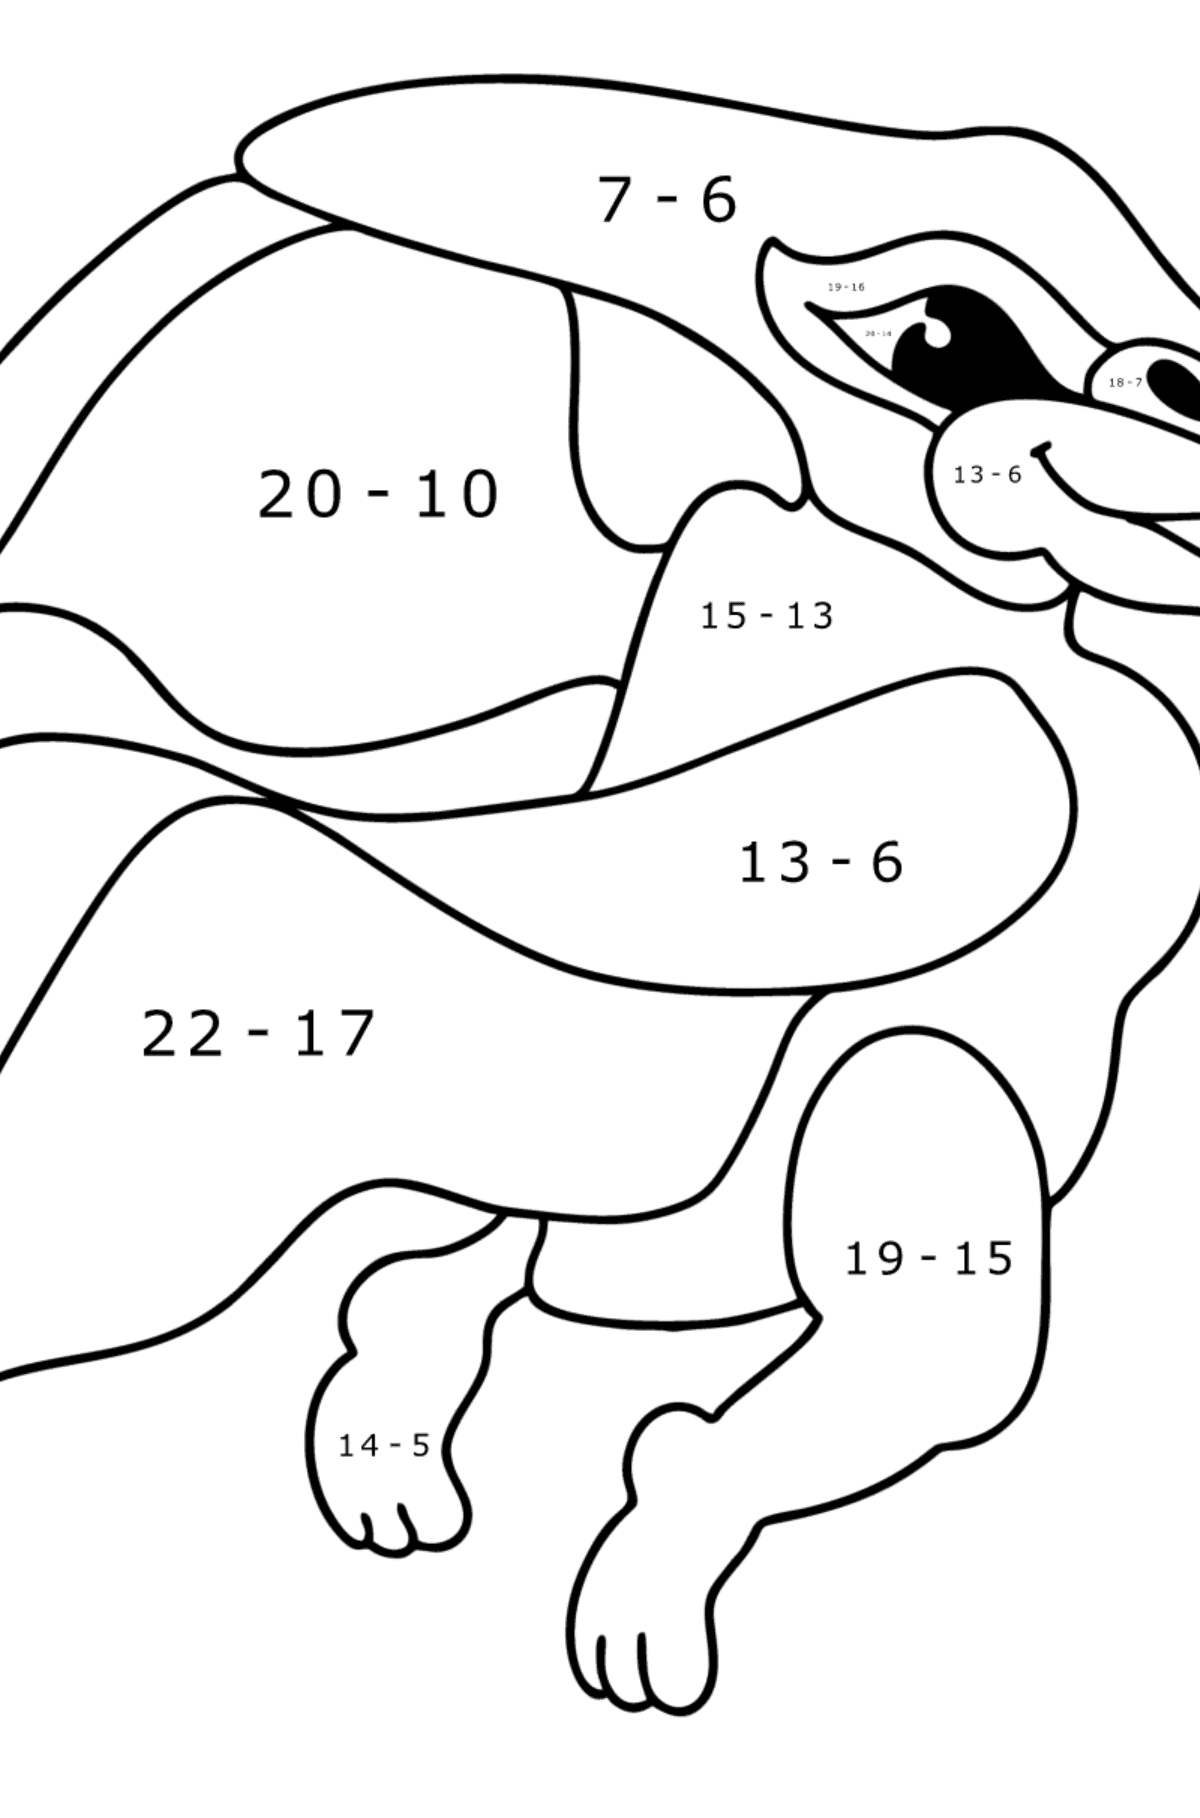 Pteranodon coloring page - Math Coloring - Subtraction for Kids